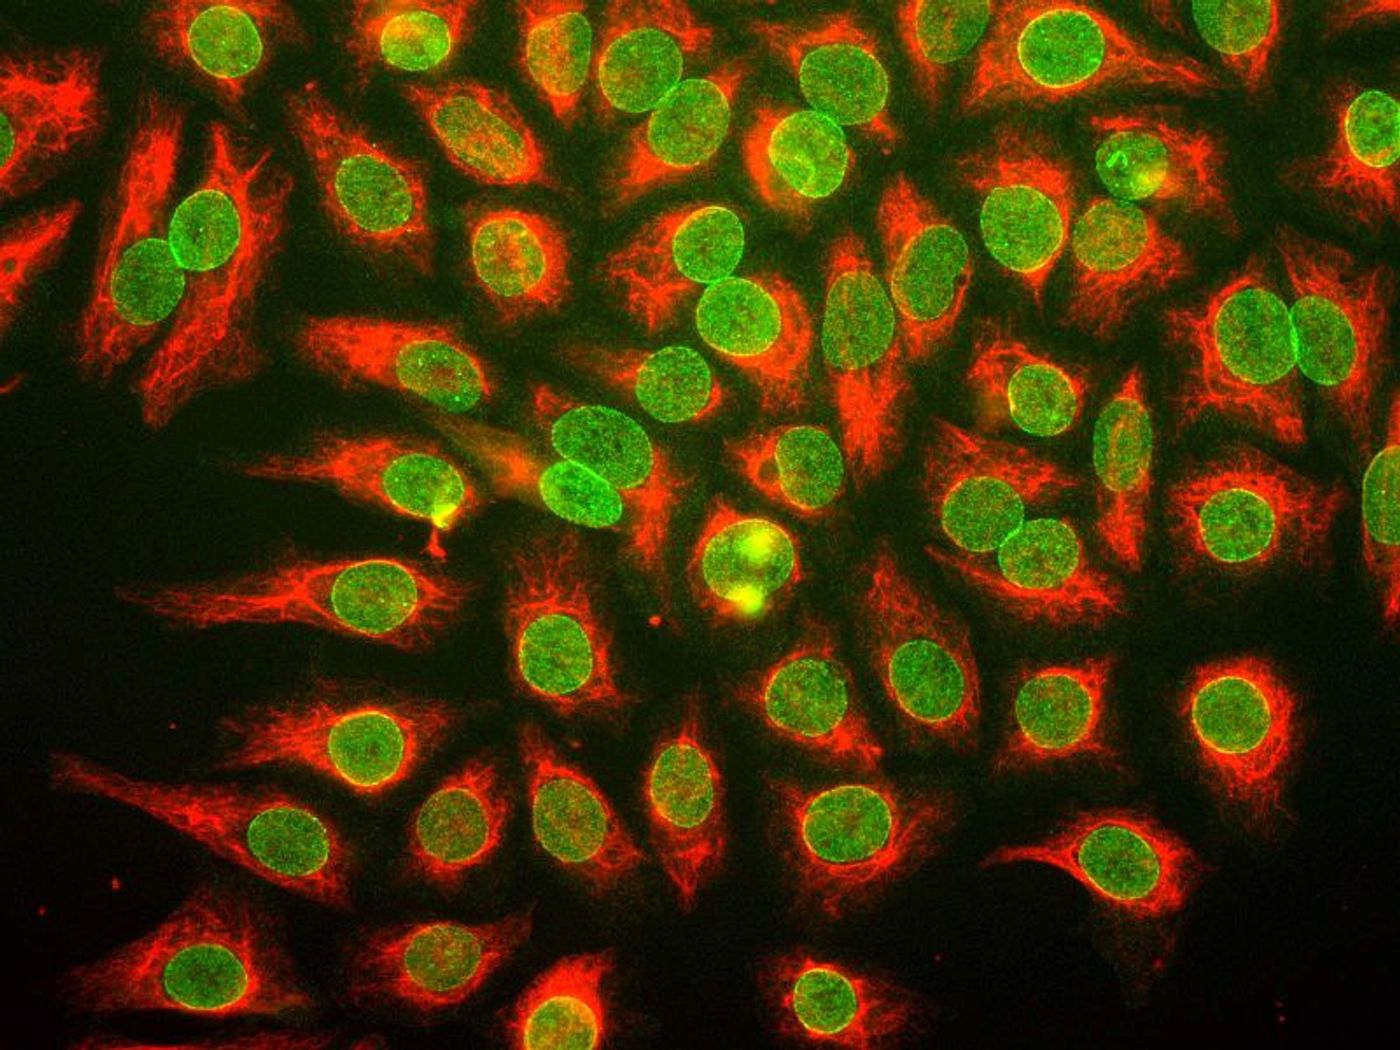 HeLa cells grown in tissue culture and stained in green for a protein of the nuclear pore complex. Credit: Gerry Shaw